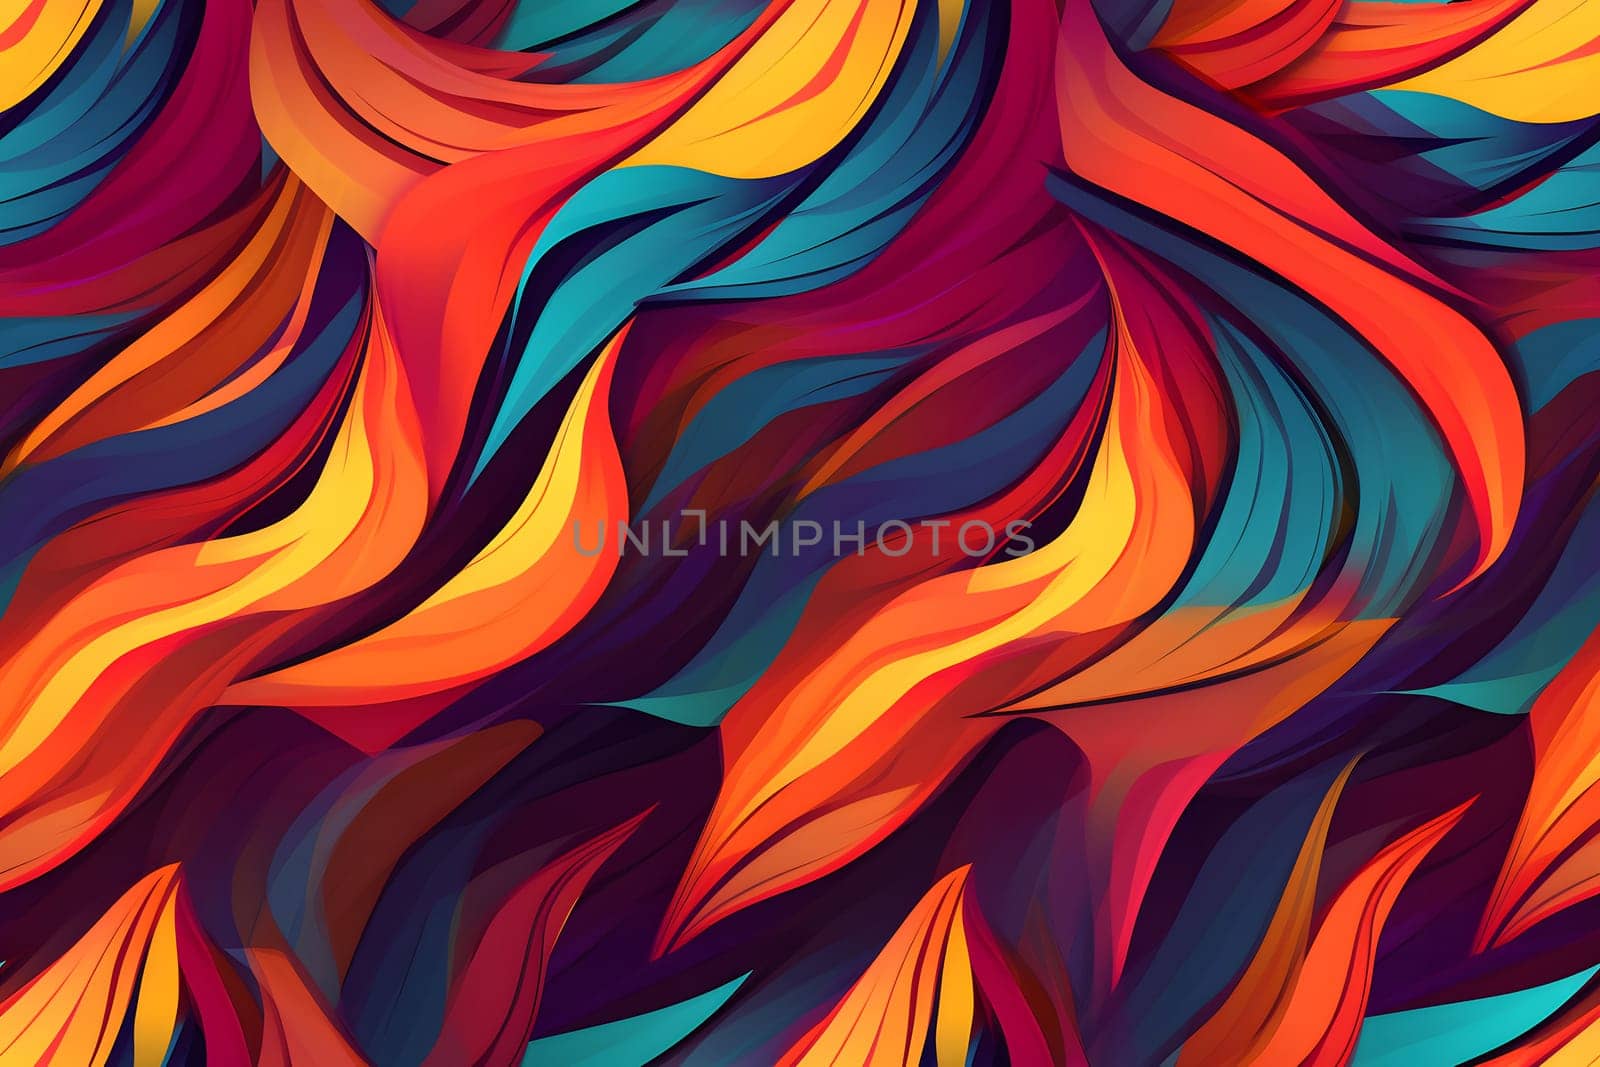 A cool seamless abstract doodle pattern inspired by 00s, neural network generated image by z1b